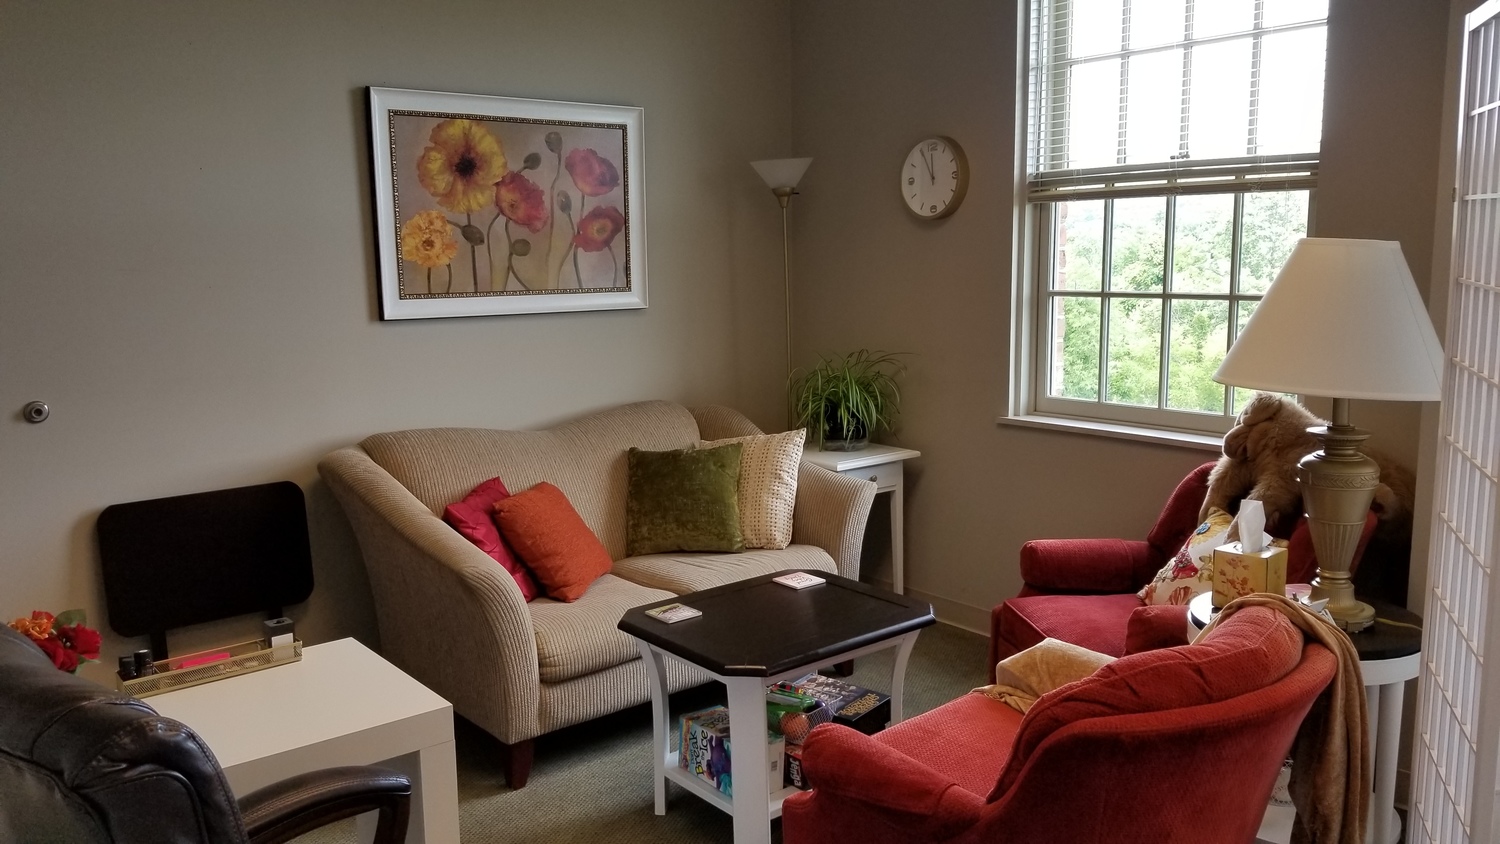 Gallery Photo of Therapist's office, counseling area